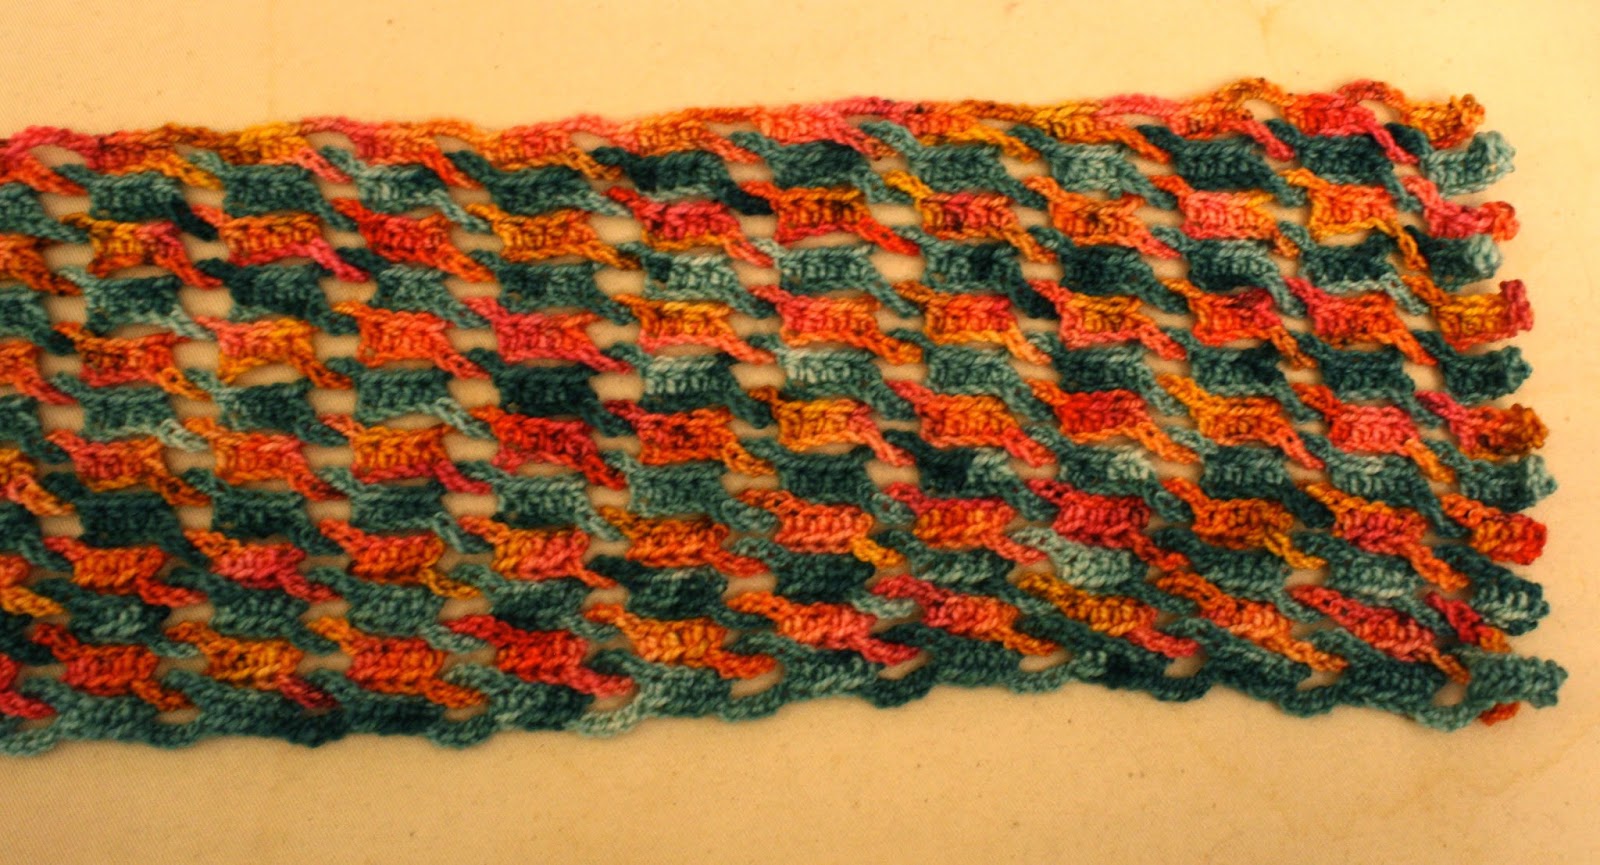 QueerJoe's Knitting Blog: Color and More Color